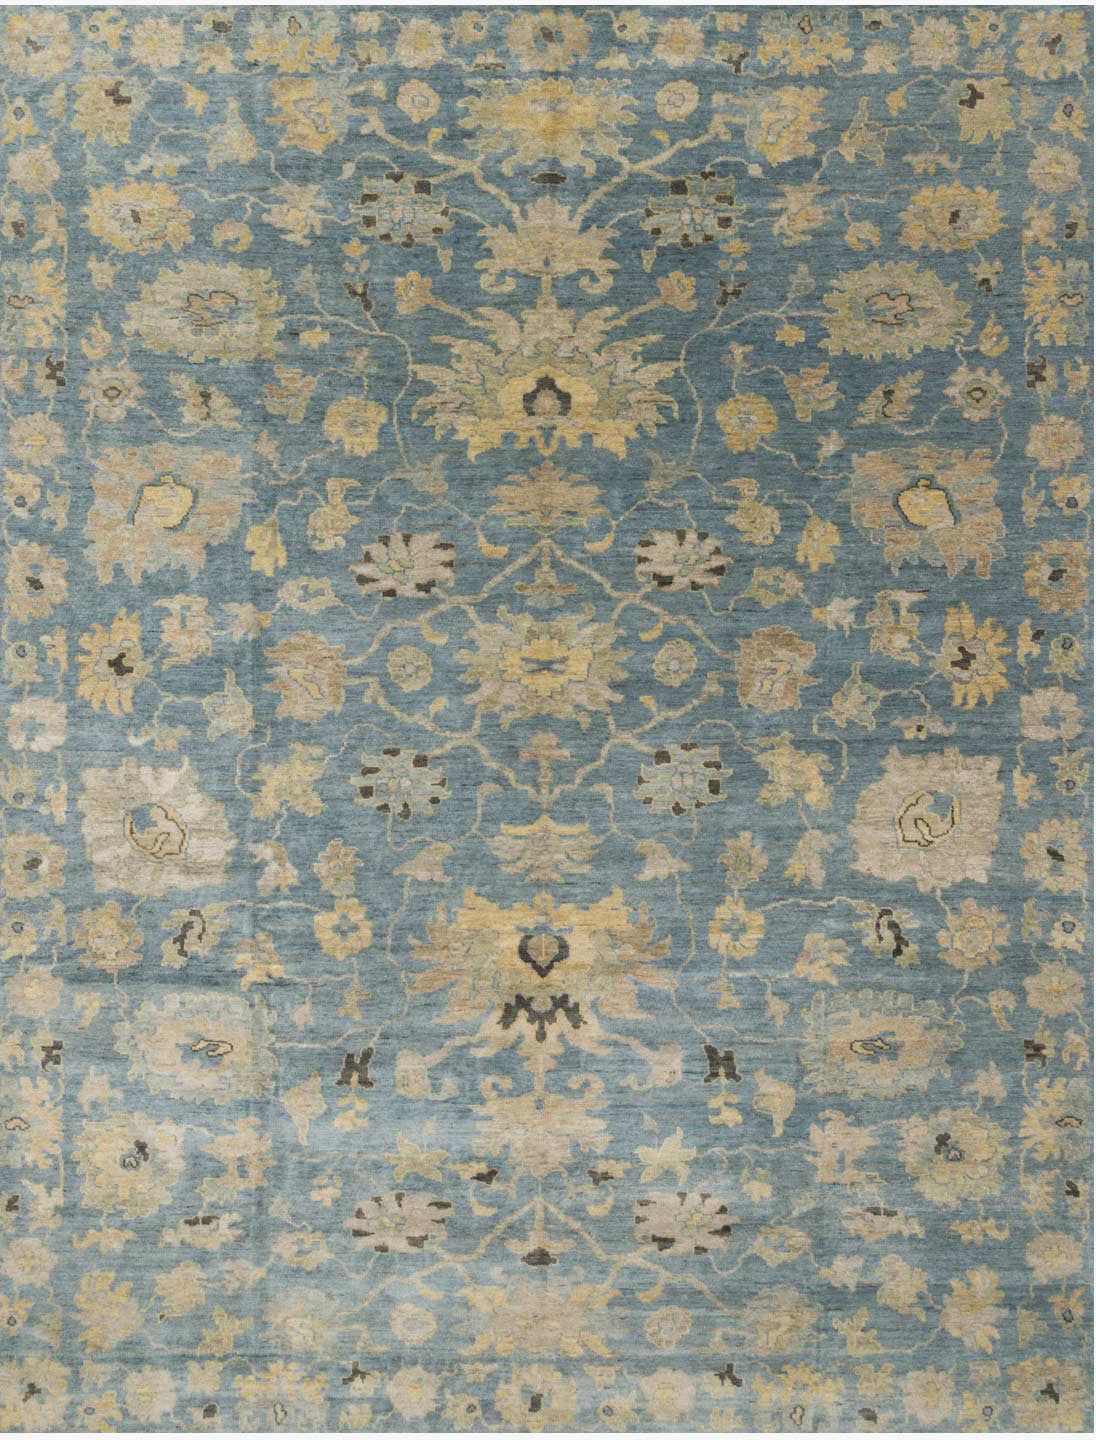 Loloi Indo Transitional Wool One of a Kind Blue Area Rug